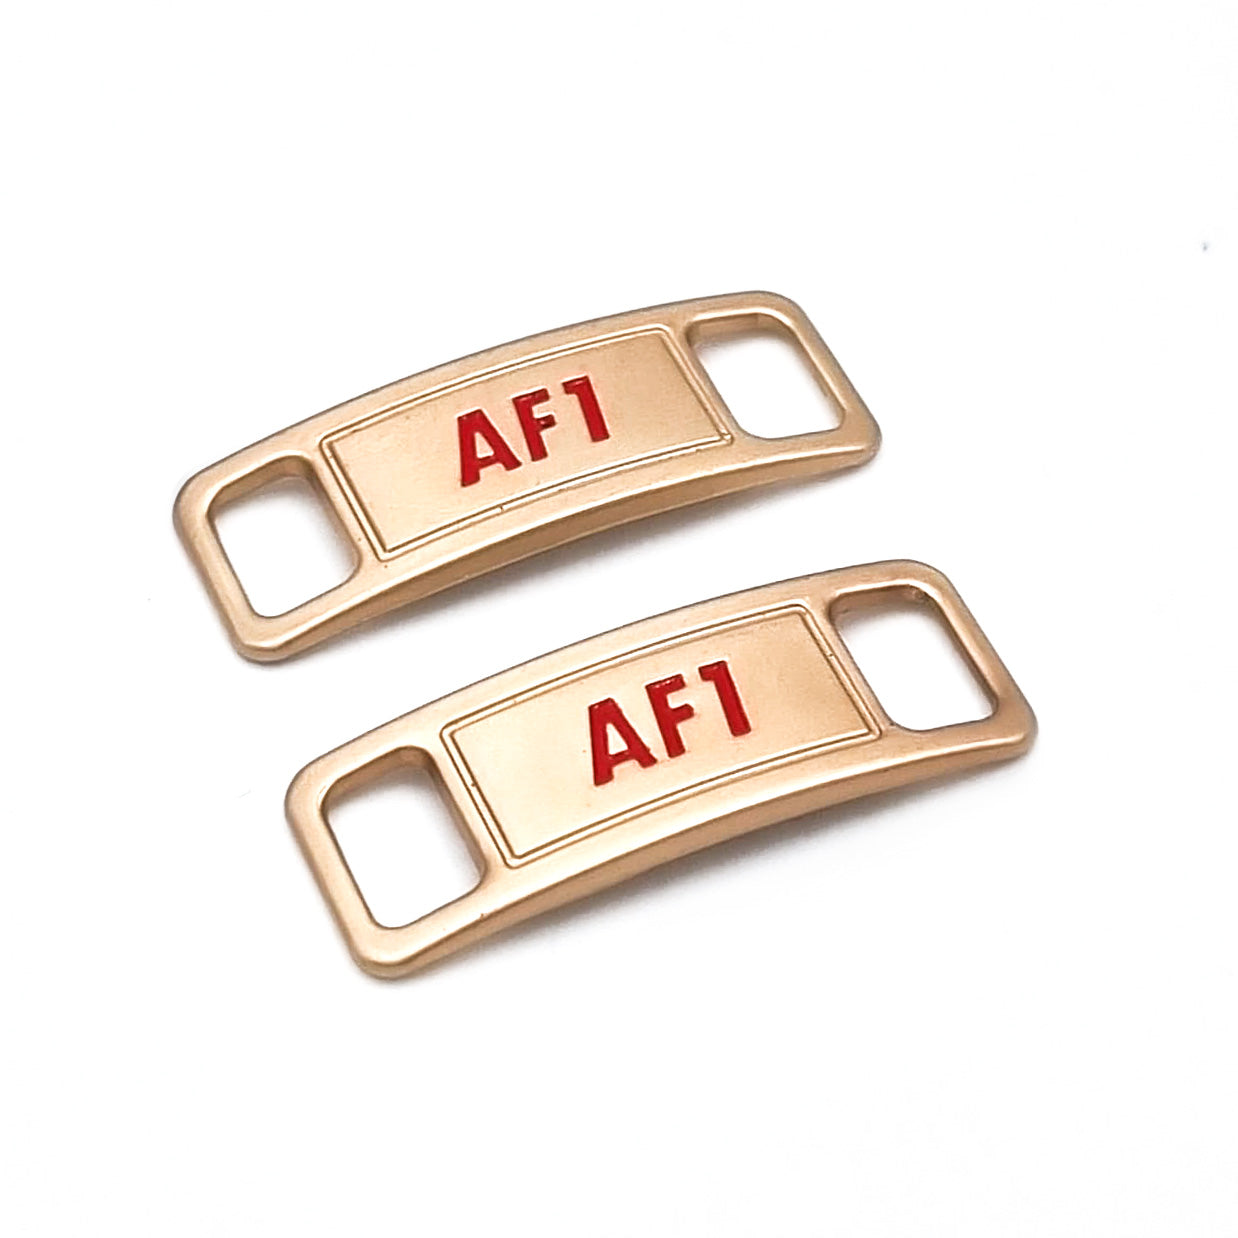 Lace Tags AF1, 1 Pair, rose-gold/red